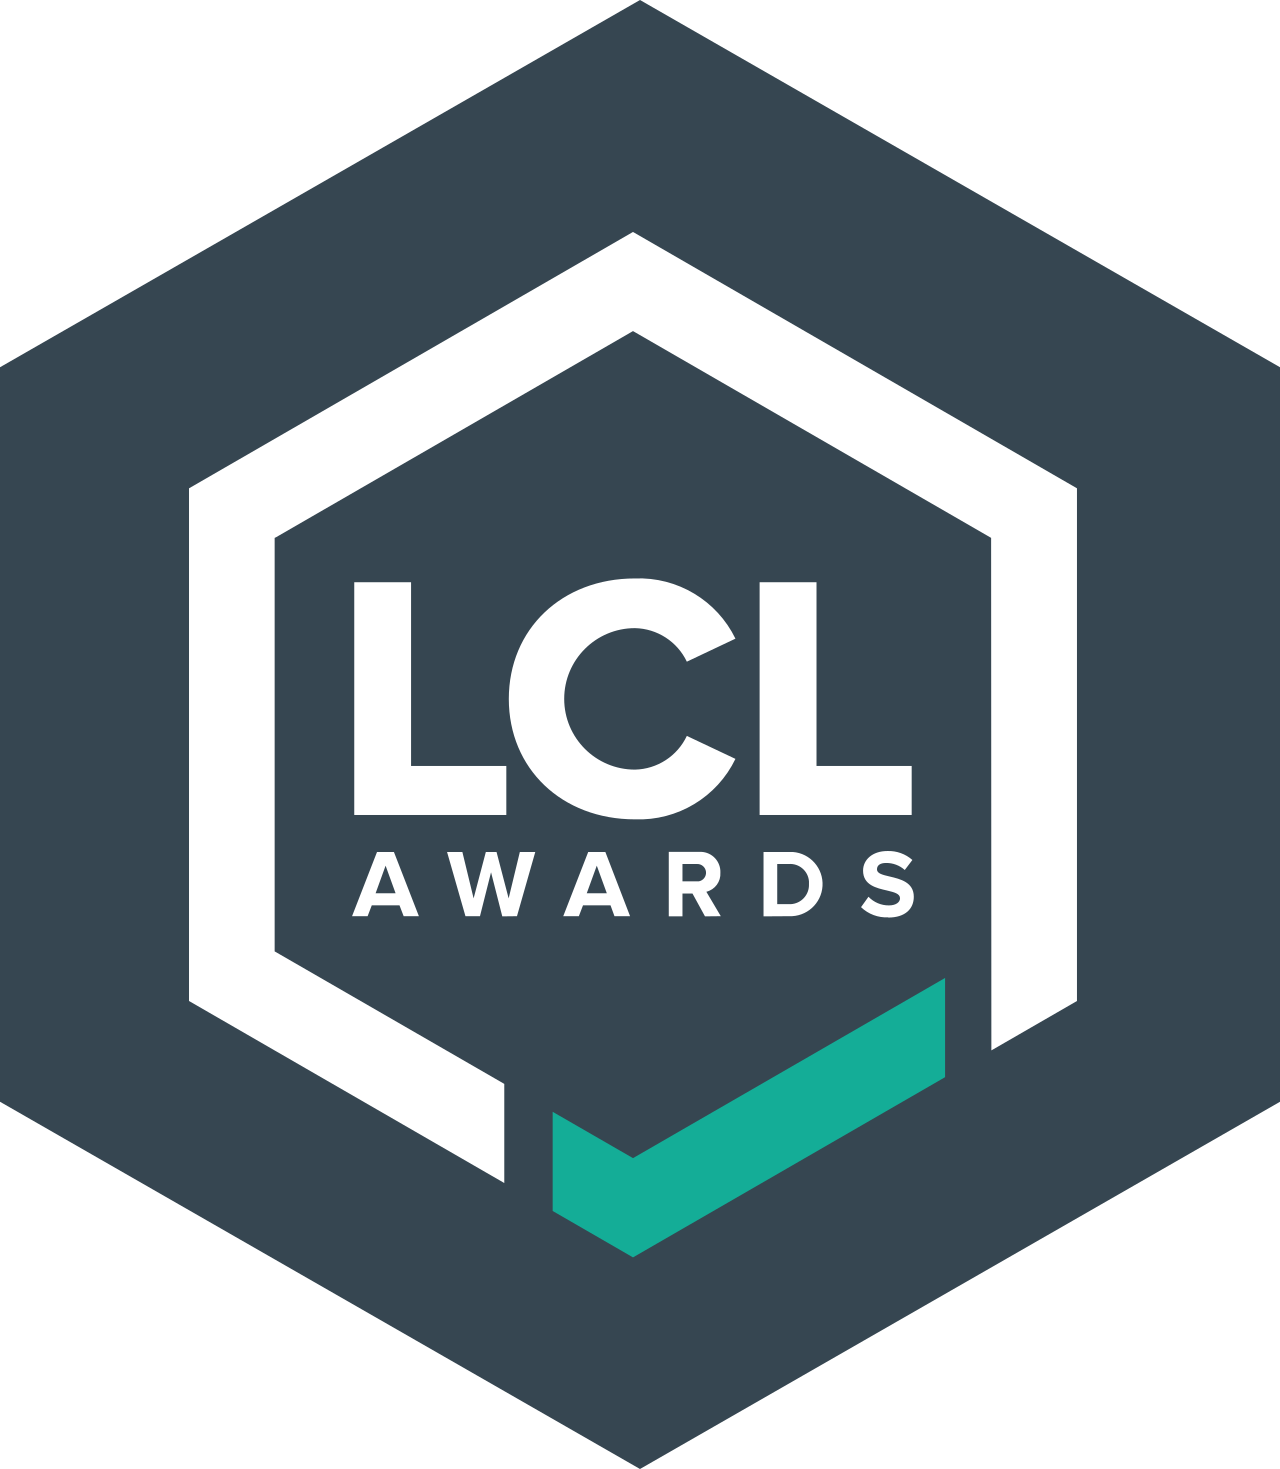 LCL-awards